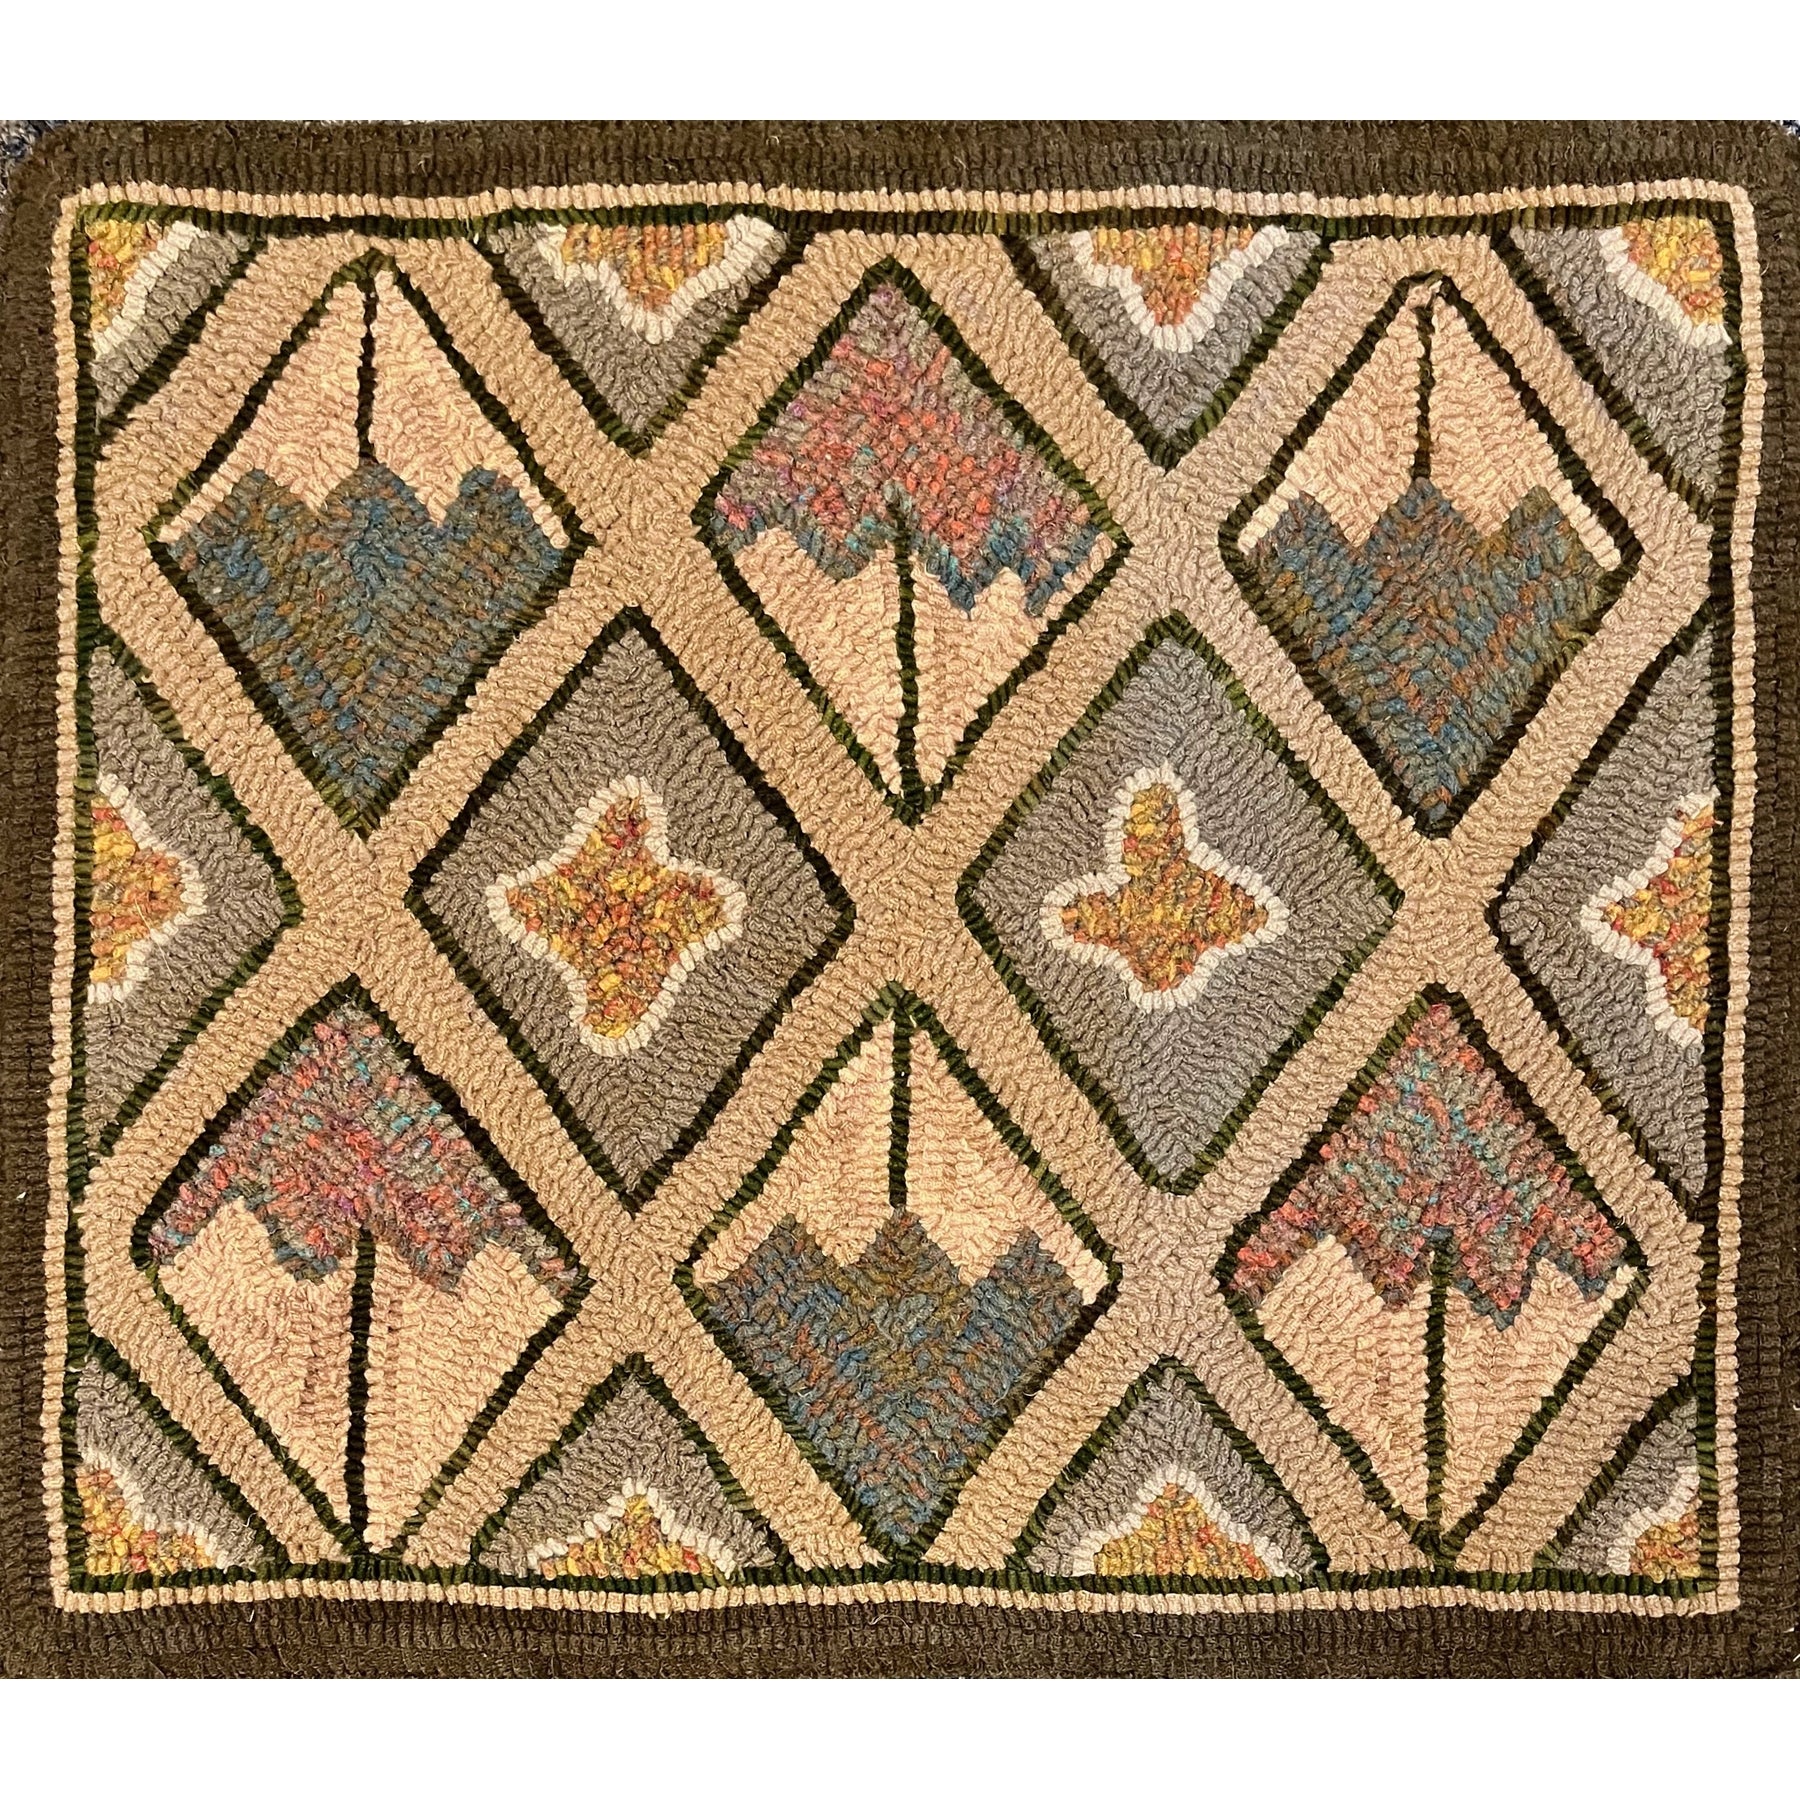 Criss Cross, rug hooked by Nancy Gingrich